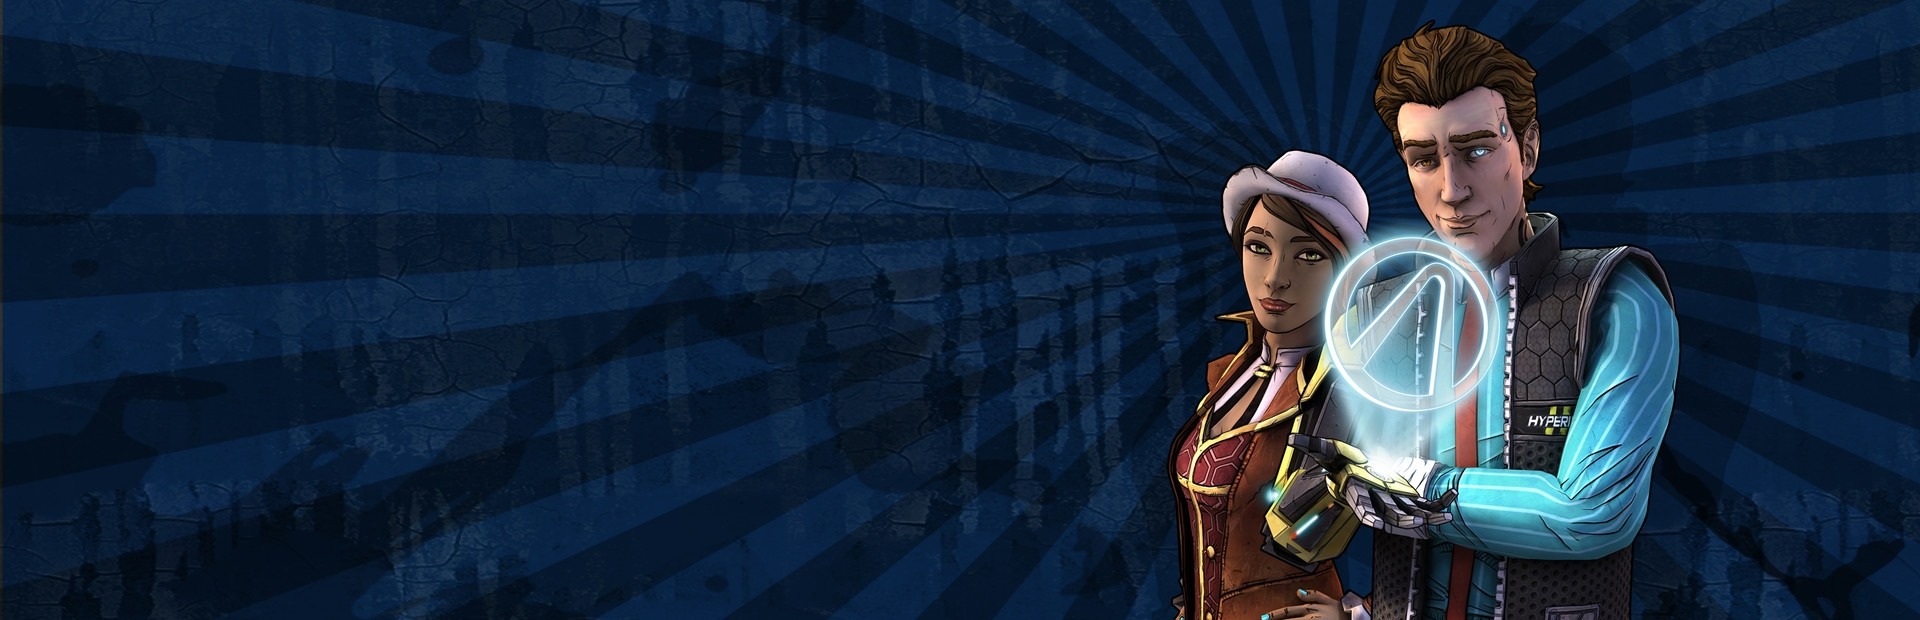 Tales from the Borderlands Redux